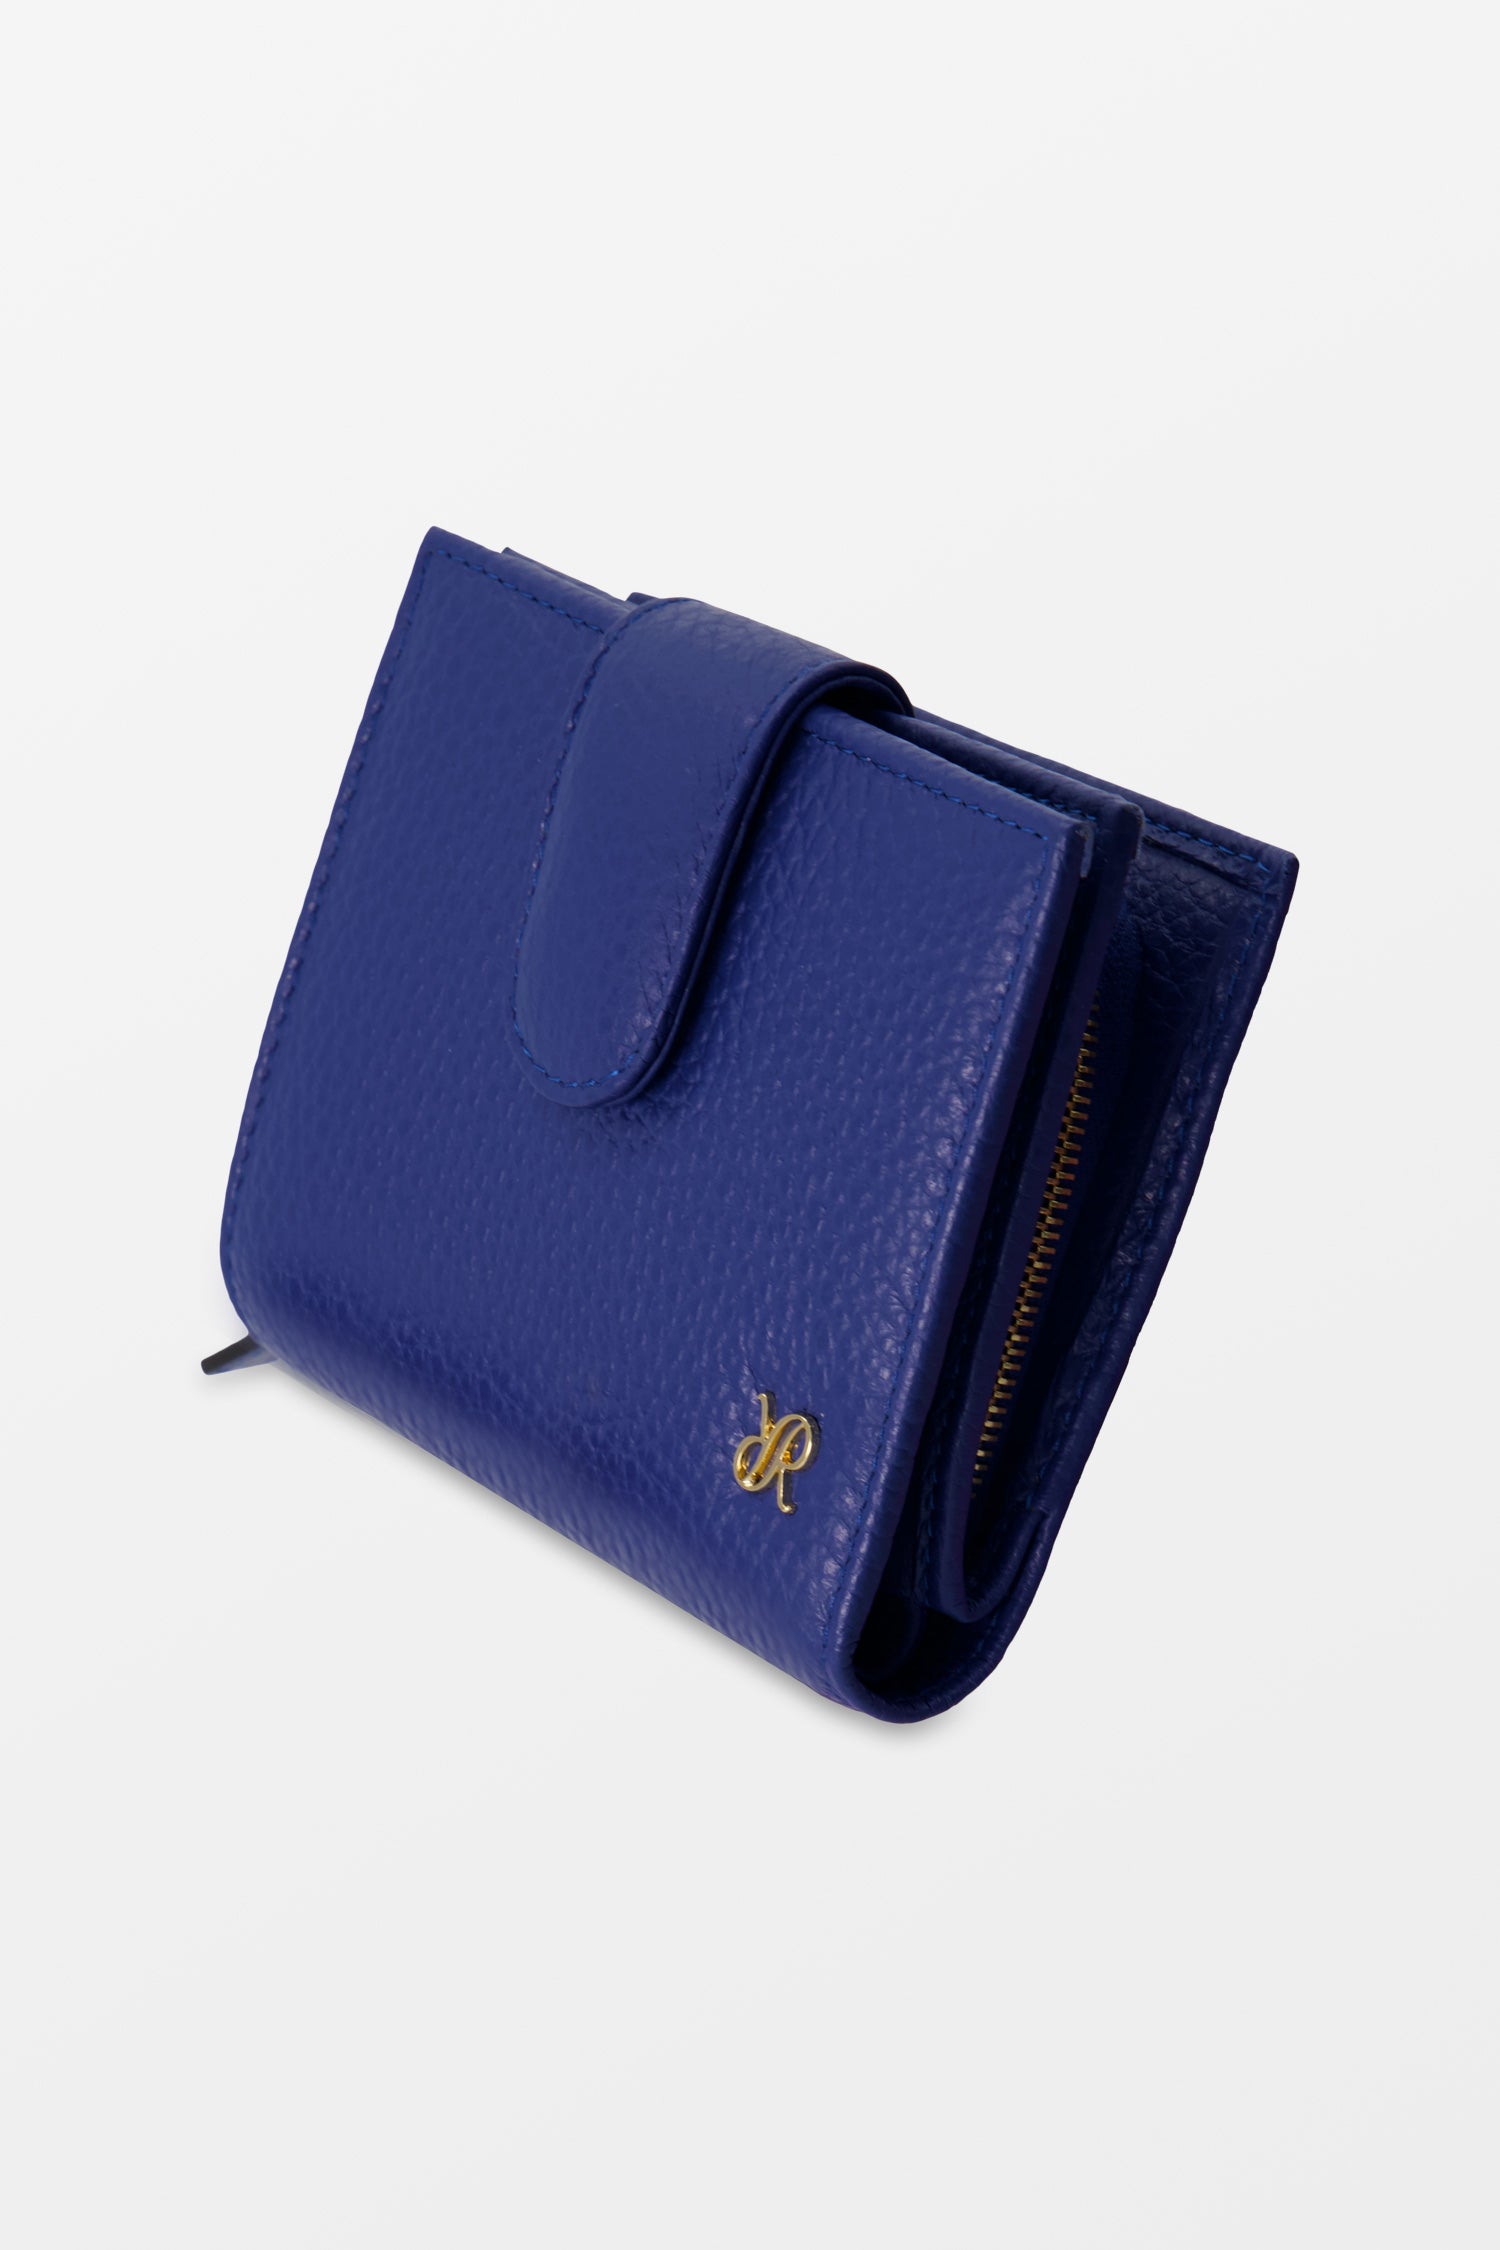 Rapport Blue Sussex Coin Purse